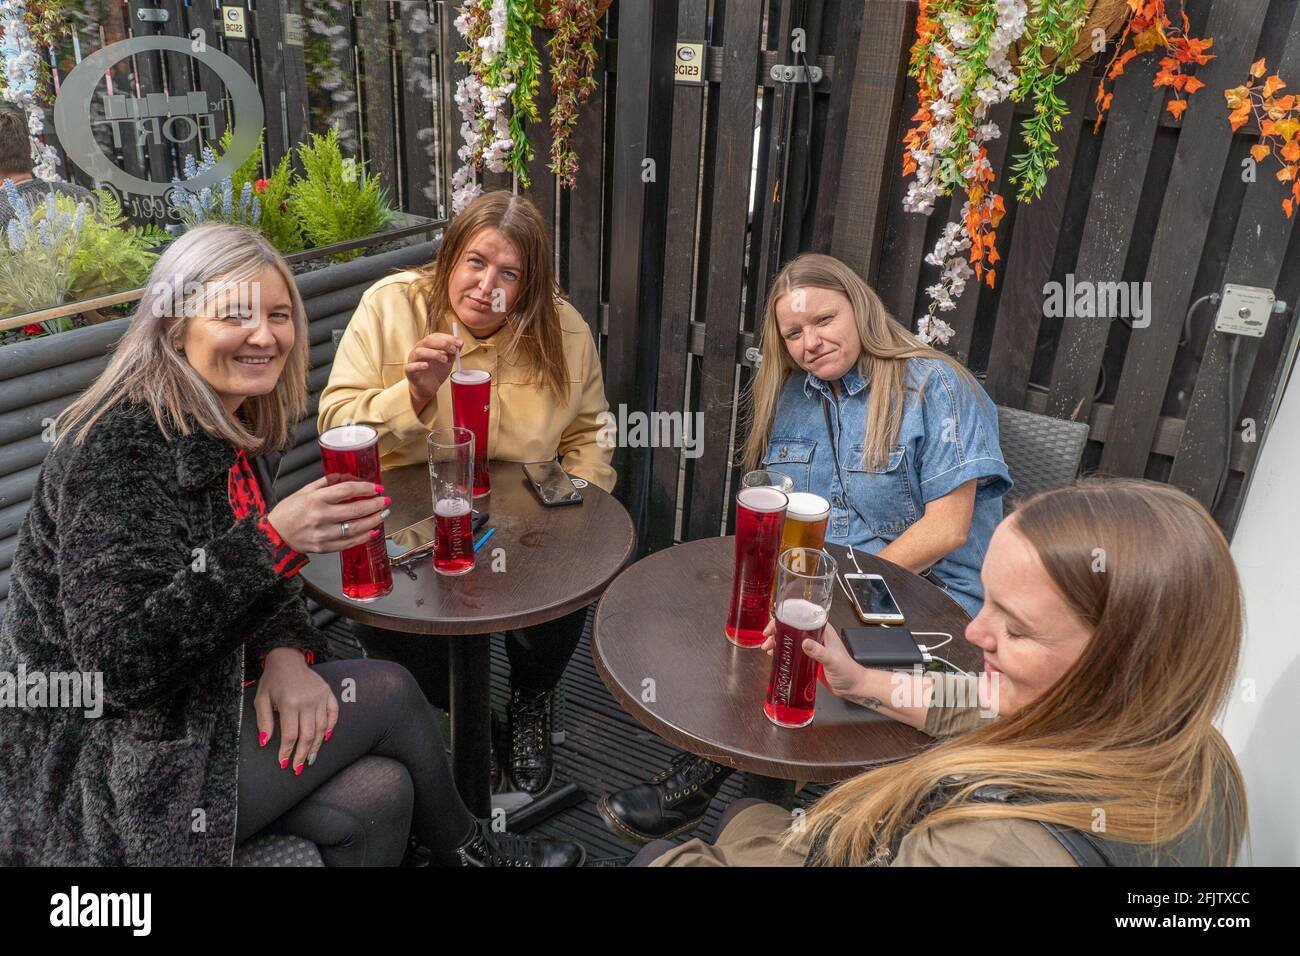 Broughty Ferry, Tayside, Dundee, Scotland, 26th of Apr 2021: Punters enjoying a drink, at their local (The Fort) in Broughty Ferry, after the scottish government relaxed lockdown restrictions in Scotland, which allows pubs throughout the country to reopen until 10pm, as long as they have an outside beer garden. Hospitality has been closed during this second lockdown in scotland. Credit: Barry Nixon Stable Air Media/Alamy Live News Stock Photo